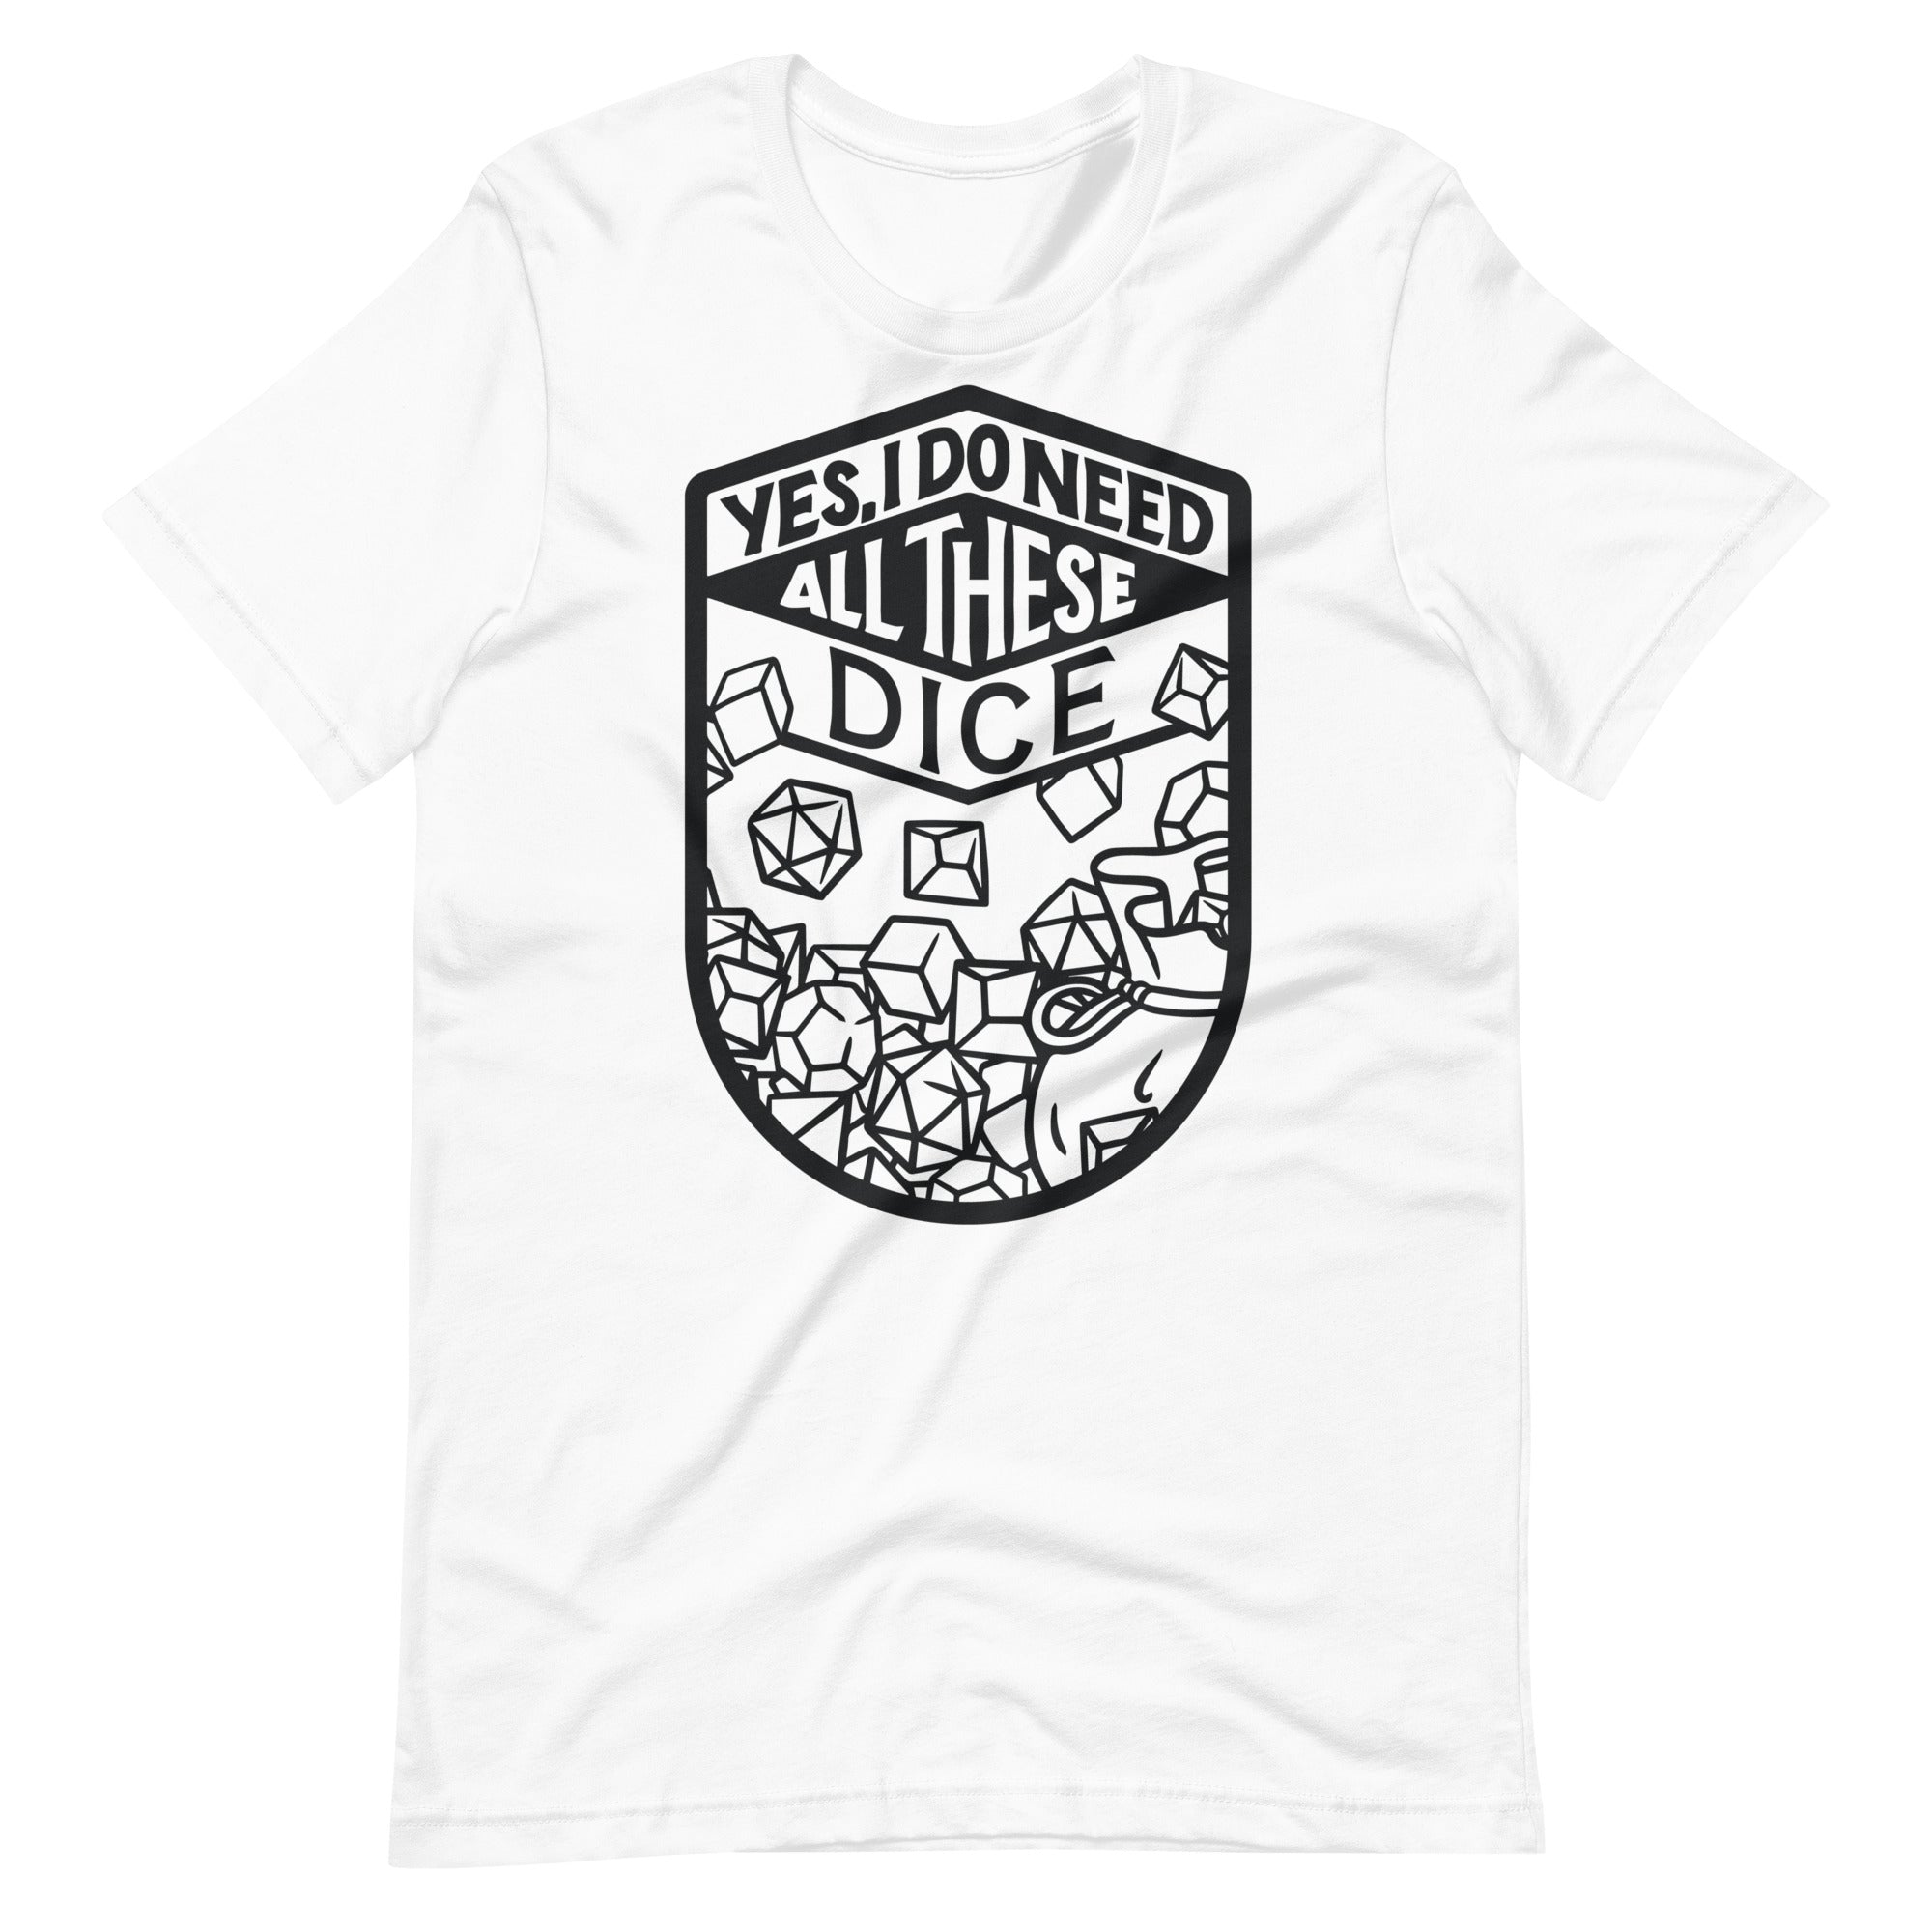 All These Dice B/W Unisex T-Shirt